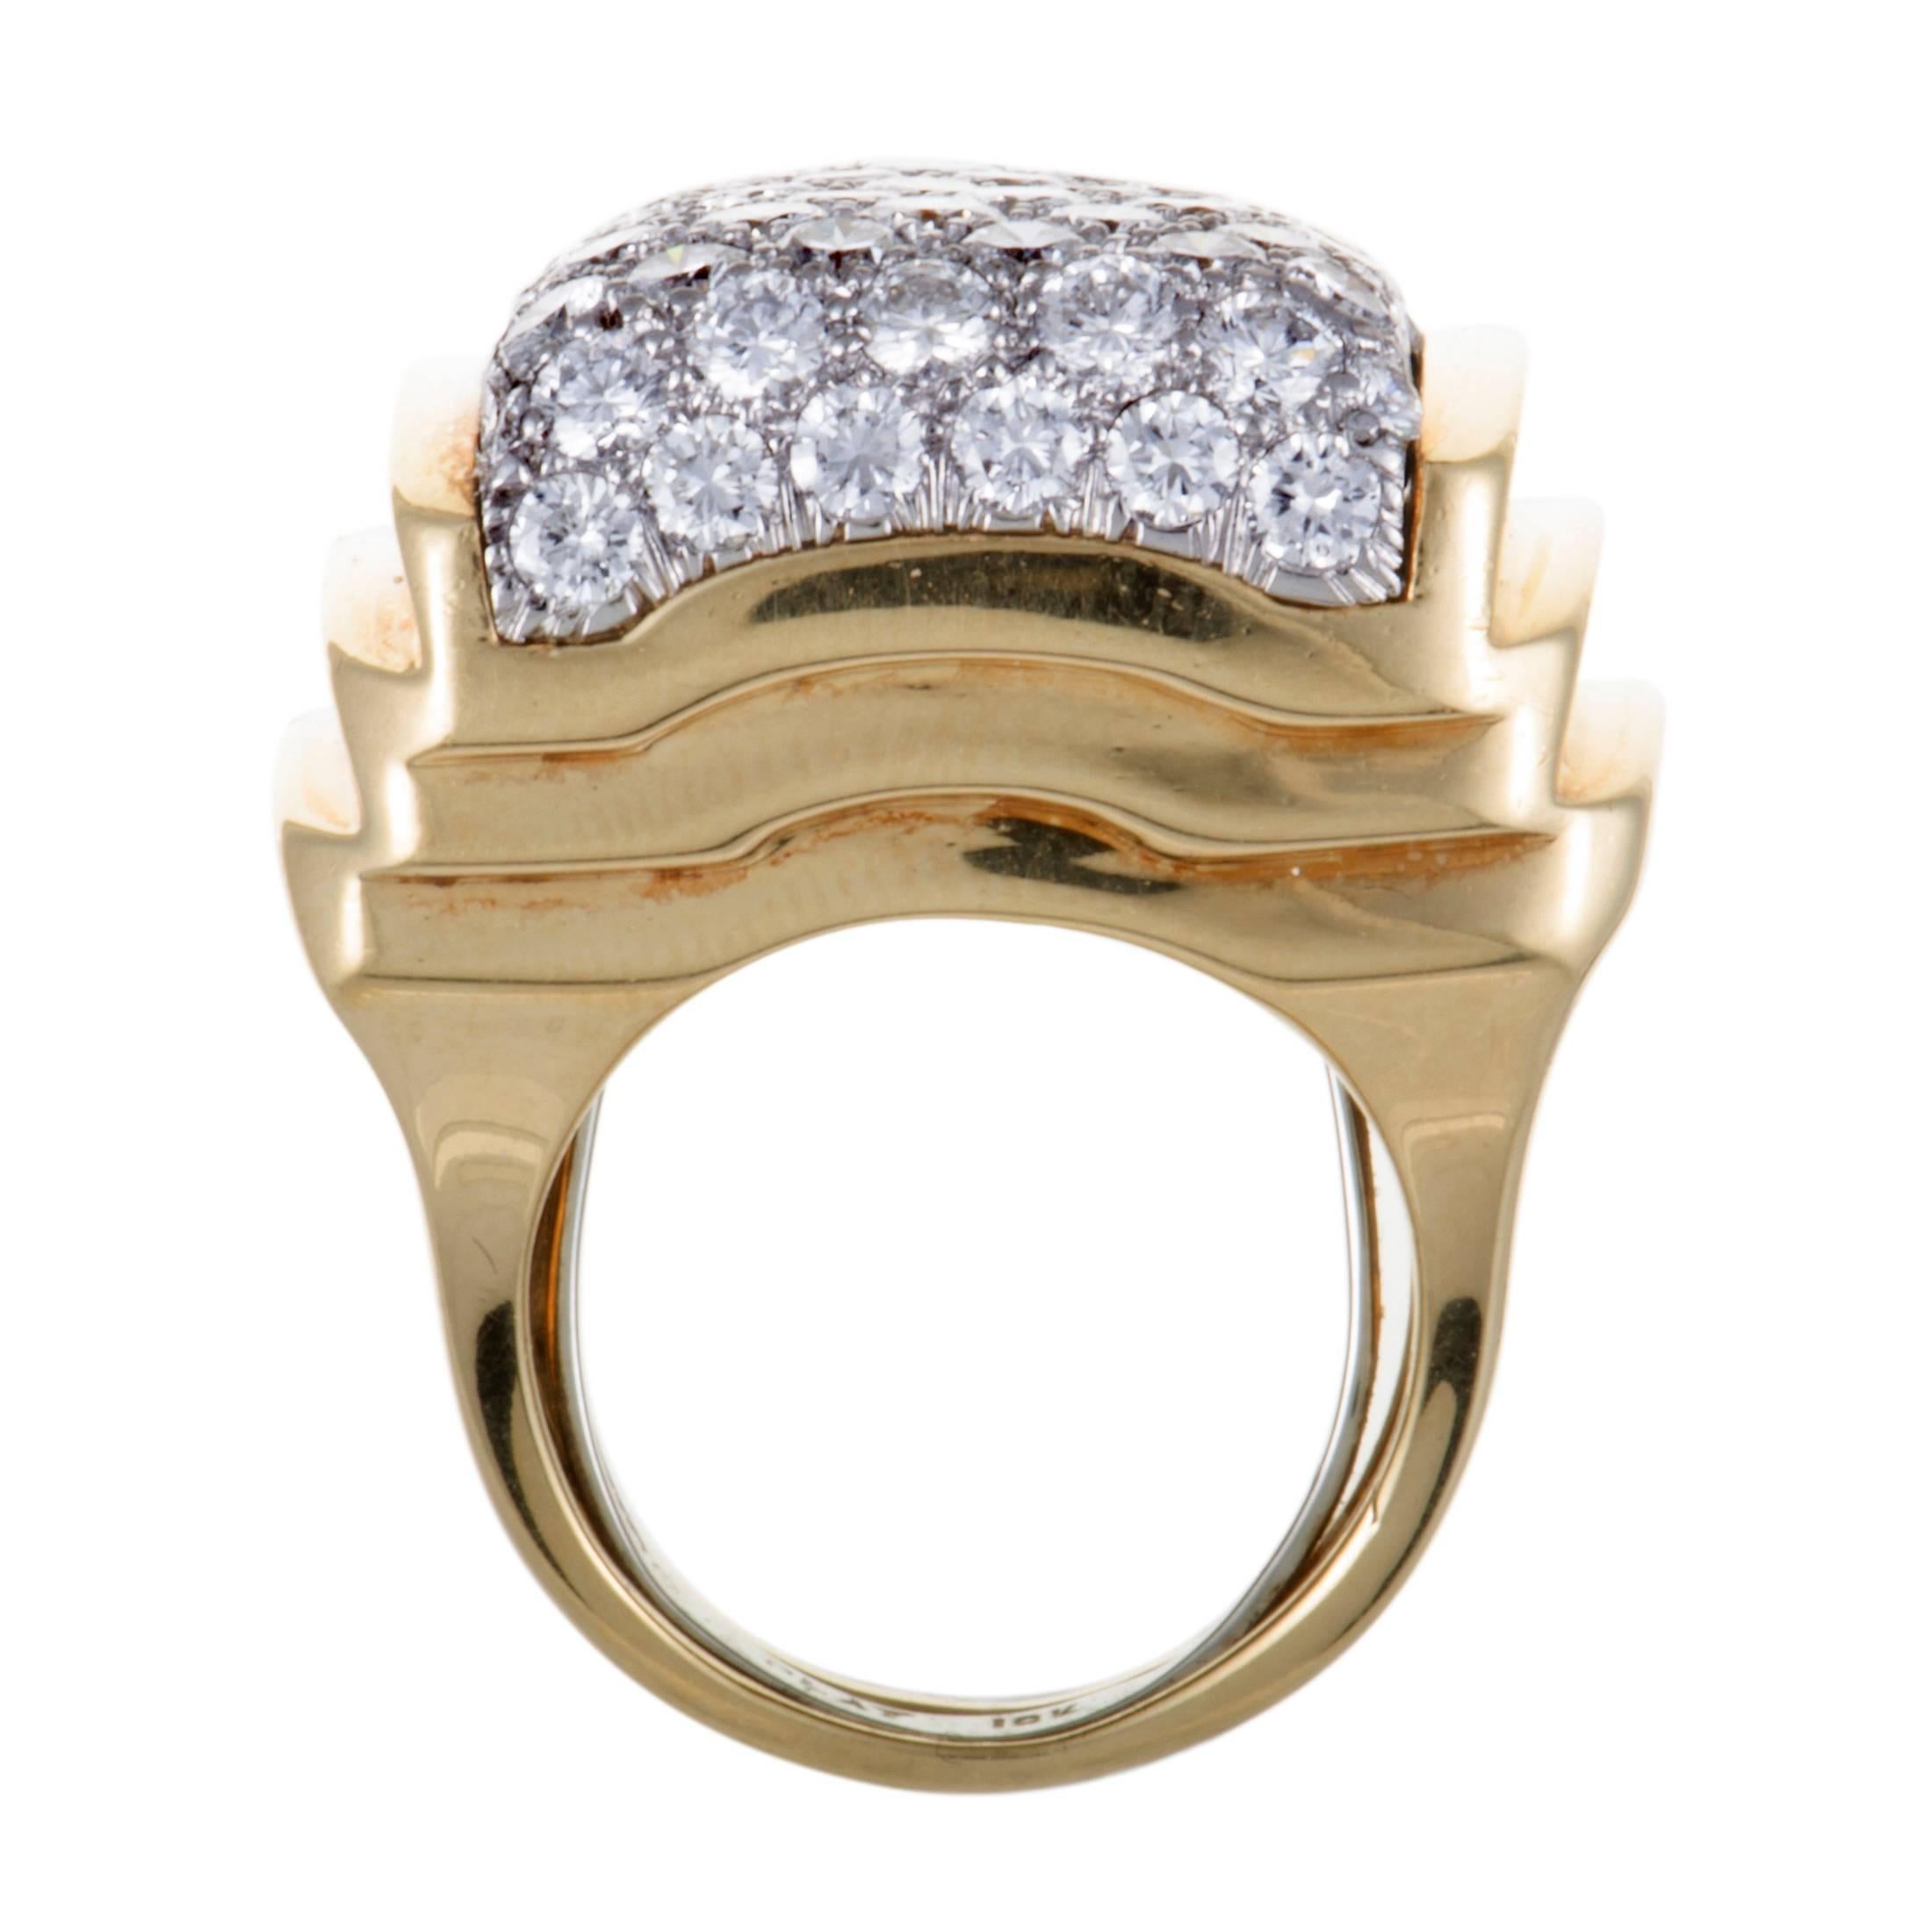 The lustrous brilliance of diamonds that are set against the elegantly gleaming platinum backdrop is beautifully brought out in this majestic ring by the enchanting radiance of 18K yellow gold. The ring is a David Webb design and it boasts a total